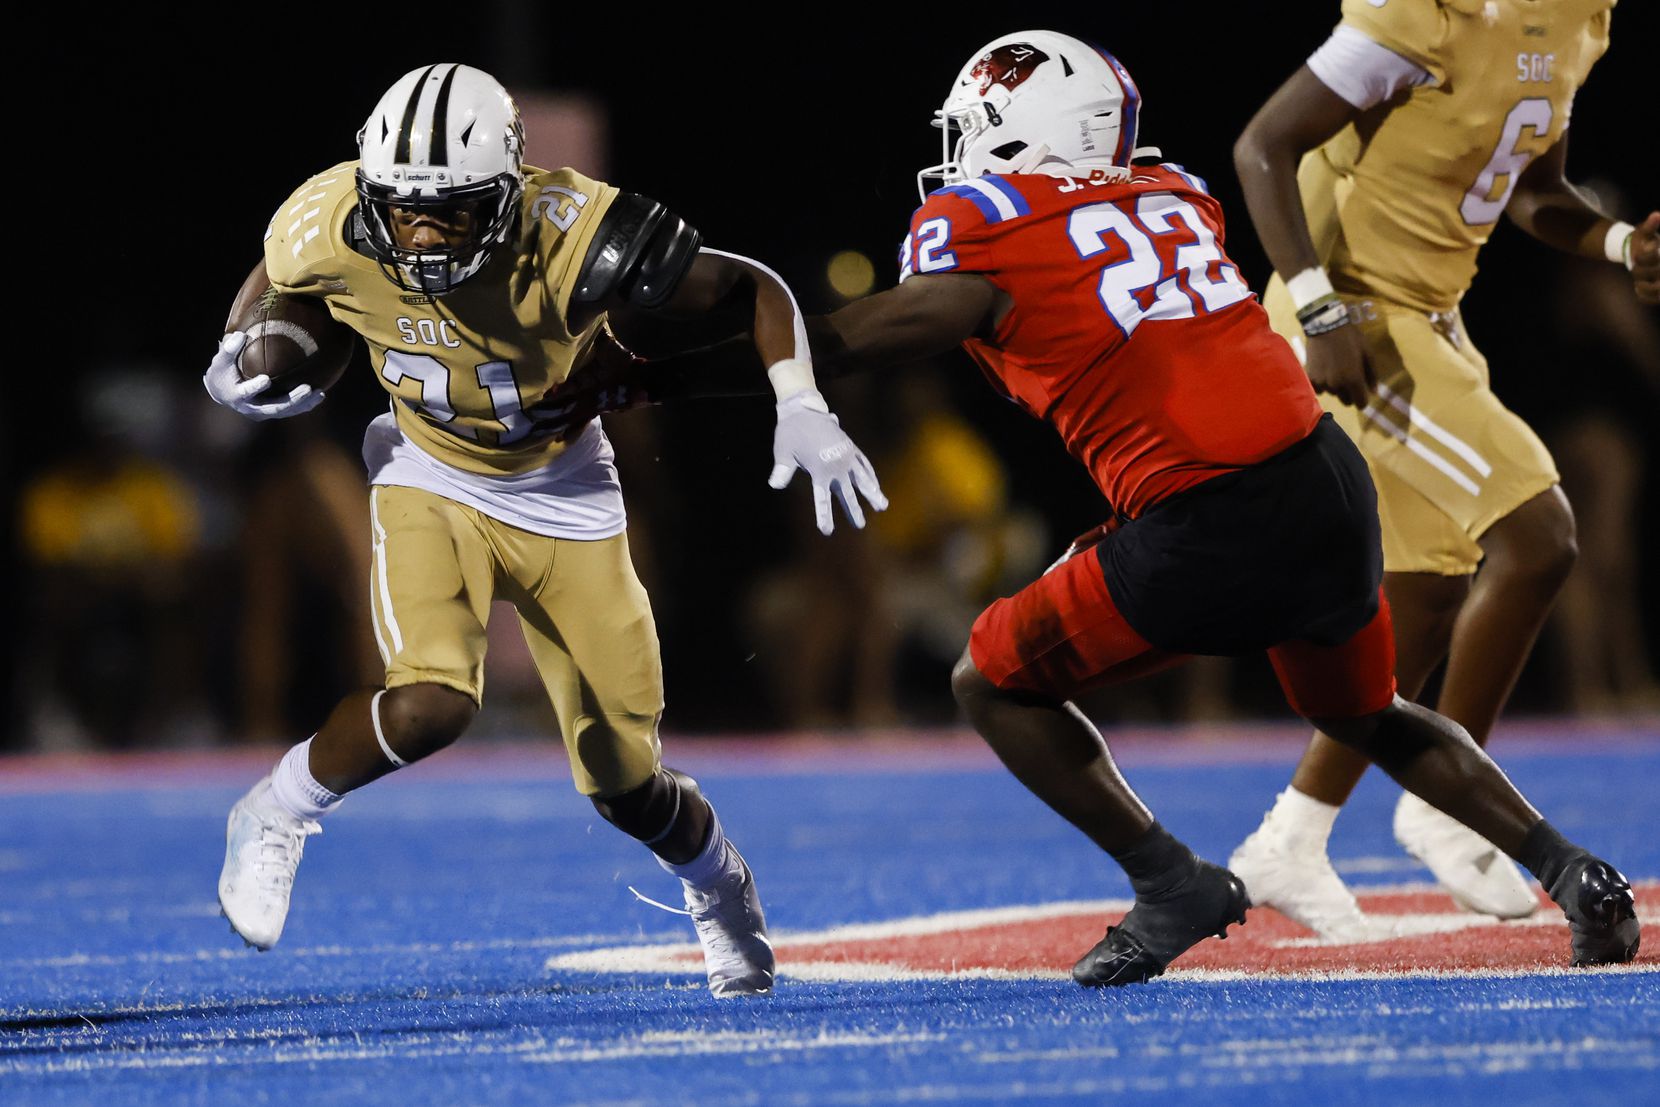 South Oak Cliff’s running back Danny Green (21) attempts to run past Parish Episcopal’s...